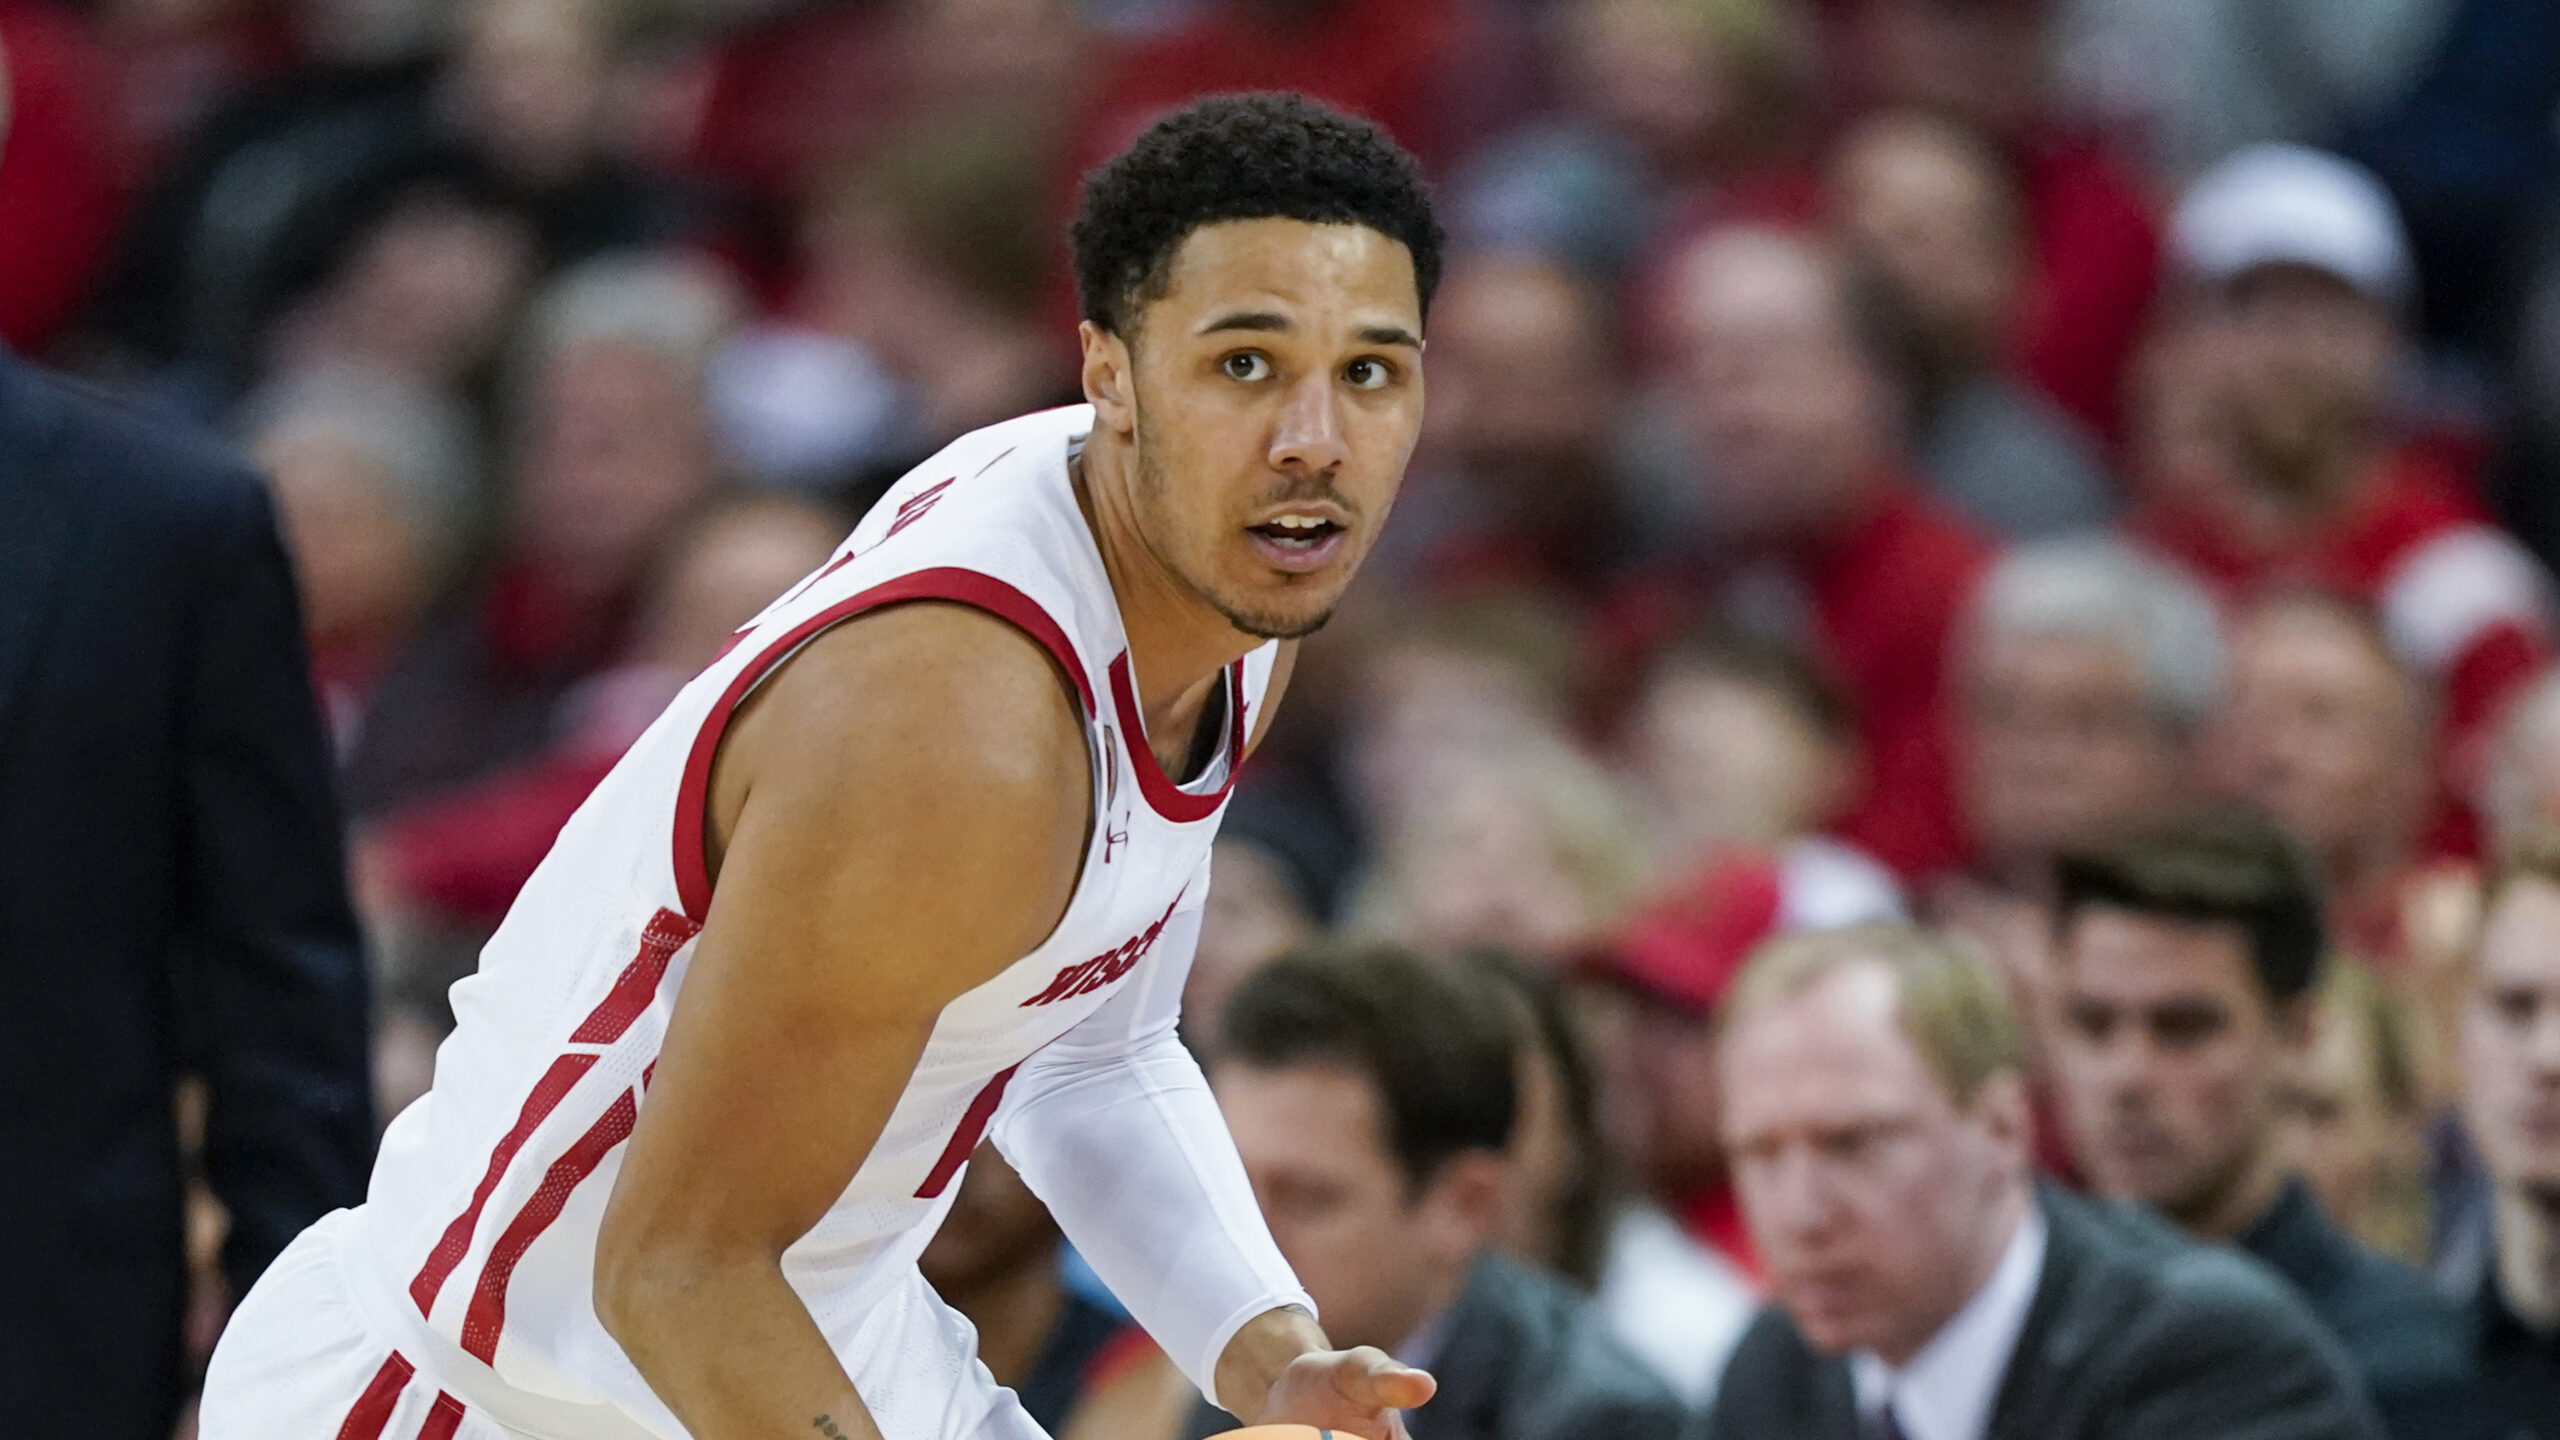 La Crosse’s Davis, Badgers struggle in blowout loss to Maryland